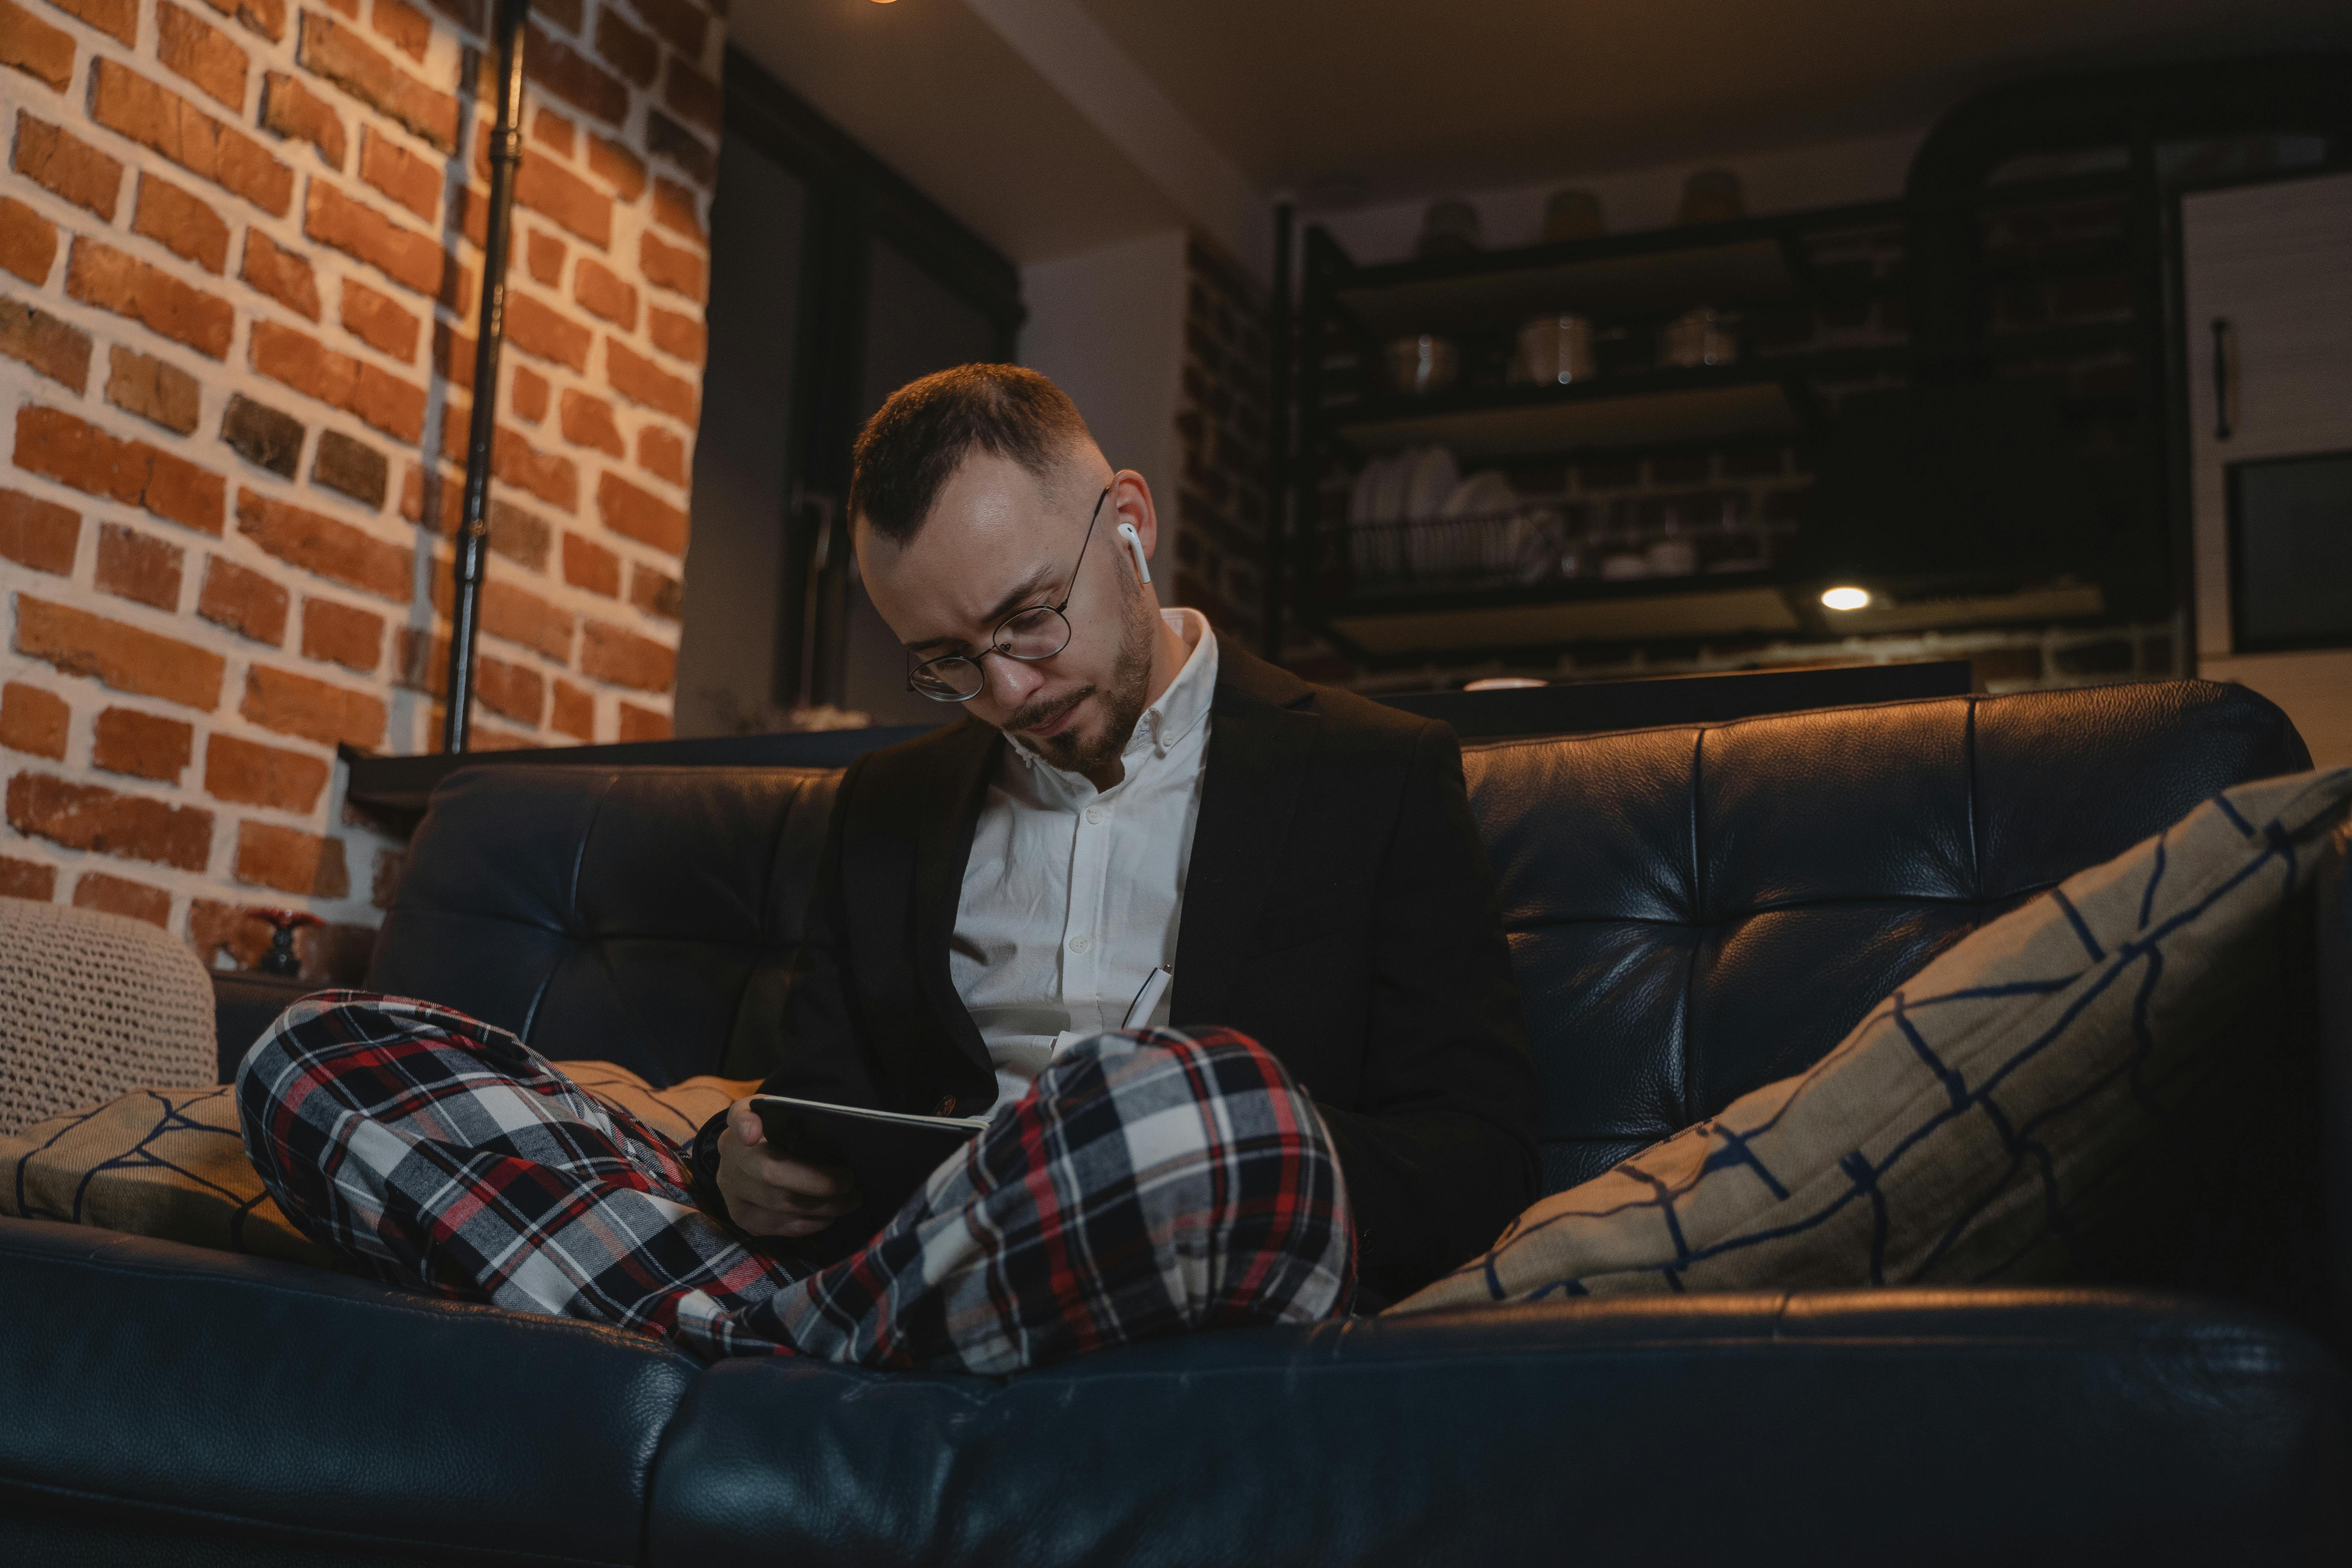 A man dressed in pajama pants and a jacket sitting on a couch | Source: Pexels